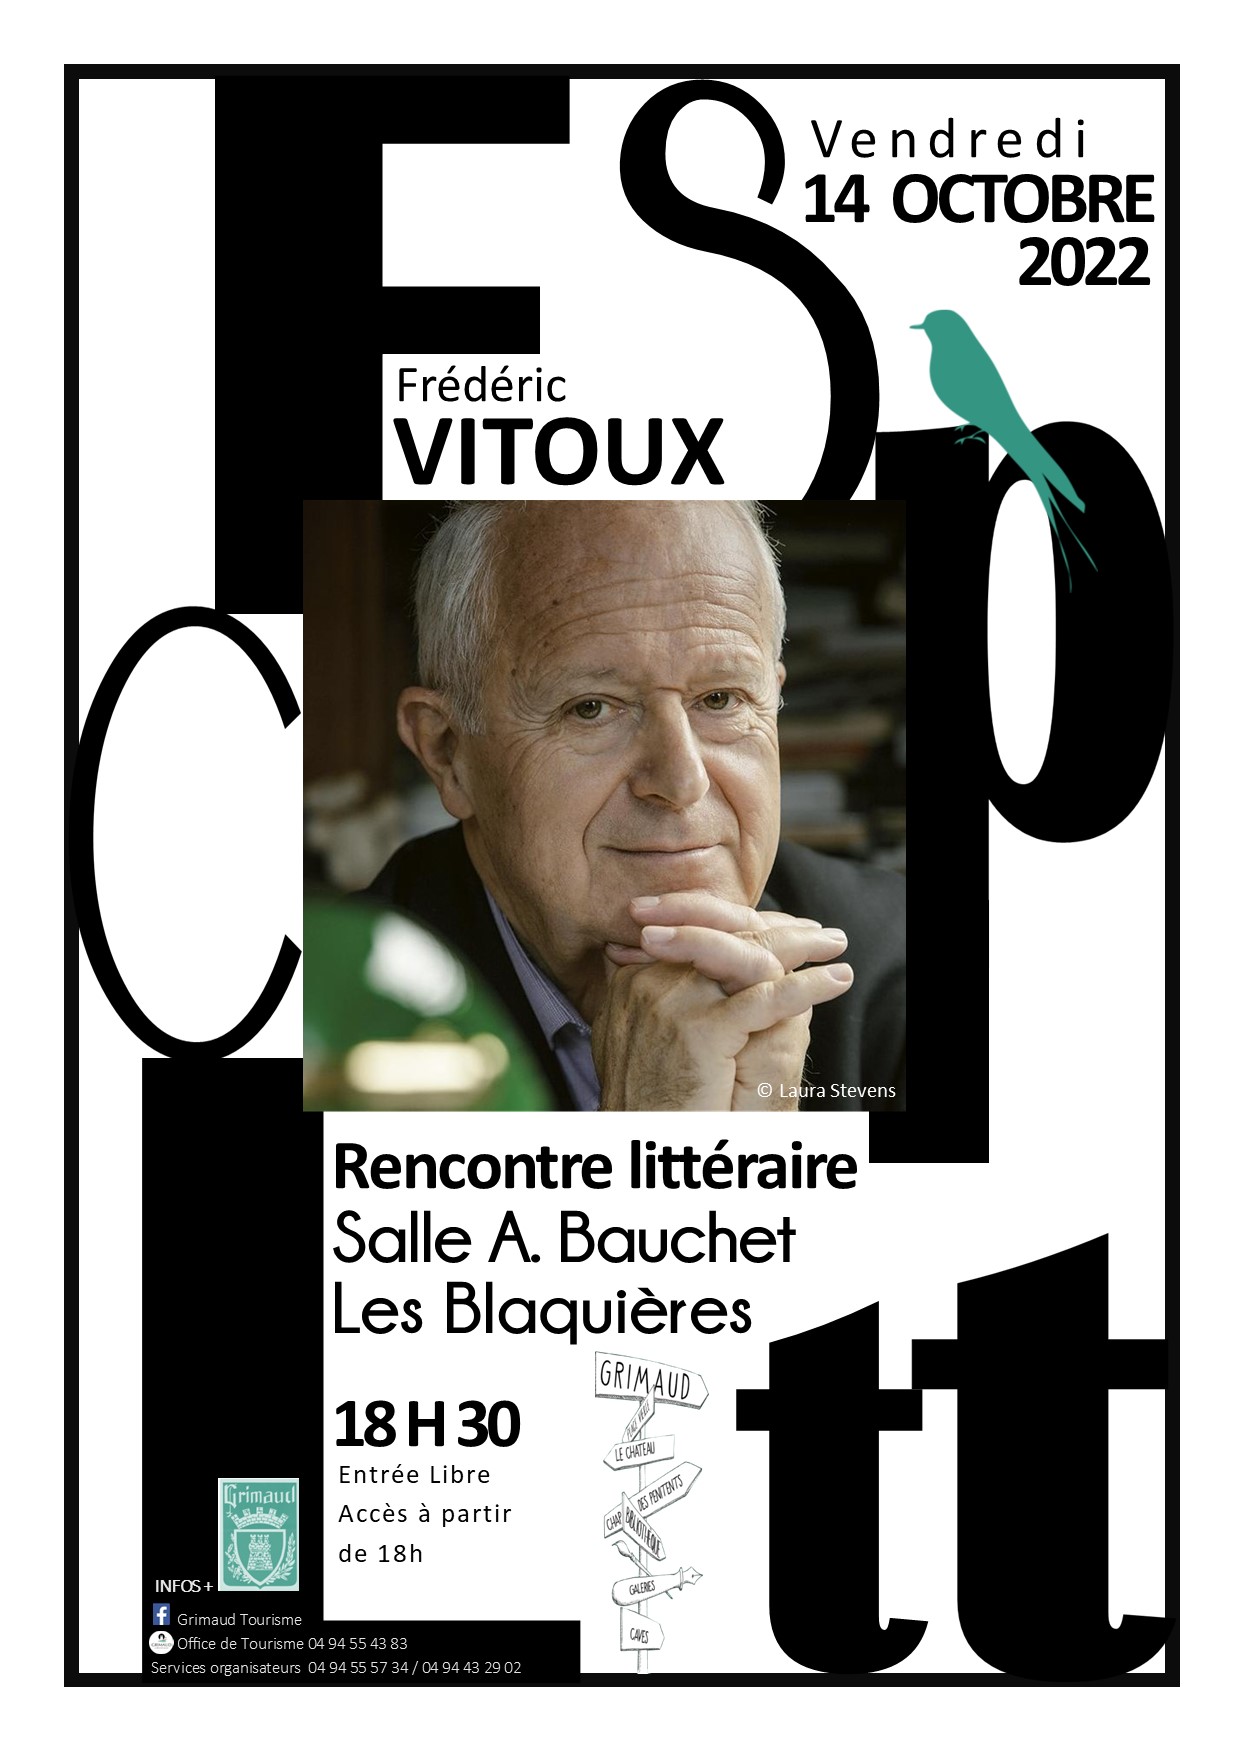 Friday, October 14, 2022: Literary getaway with Frédéric VITOUX